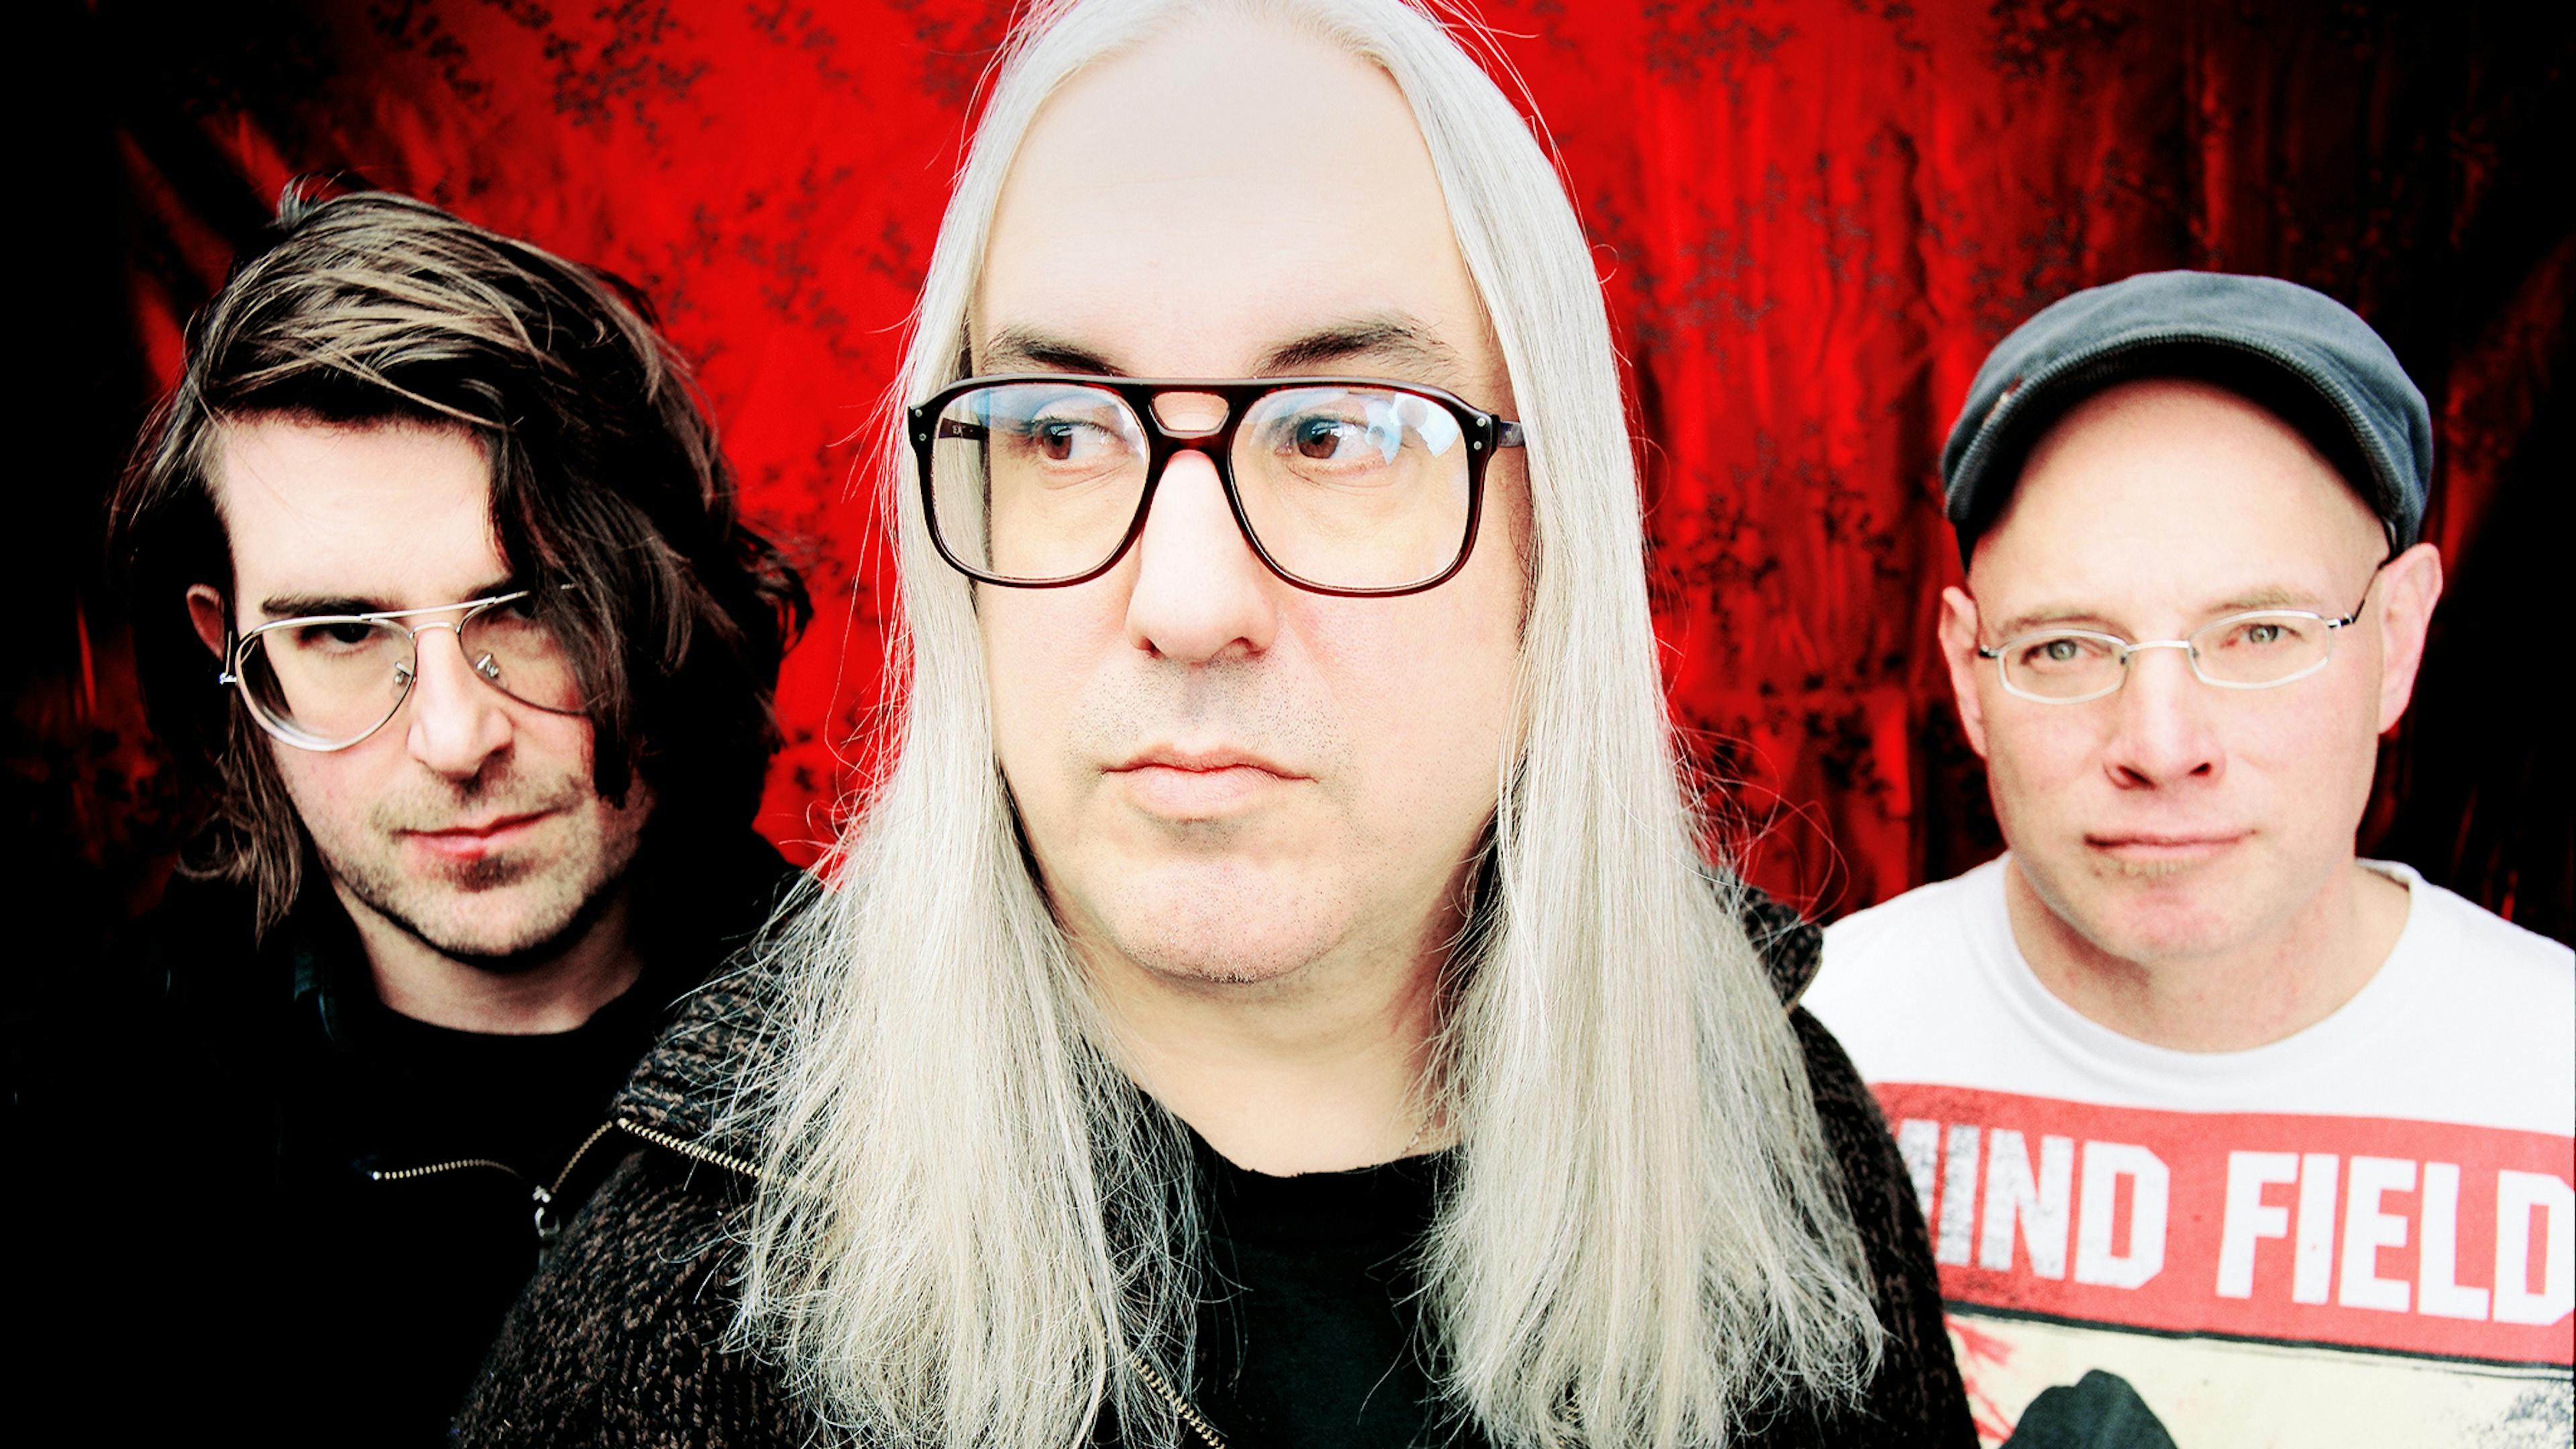 Hear Dinosaur Jr.’s cover of The Zombies as part of their 15th anniversary reissue of Farm